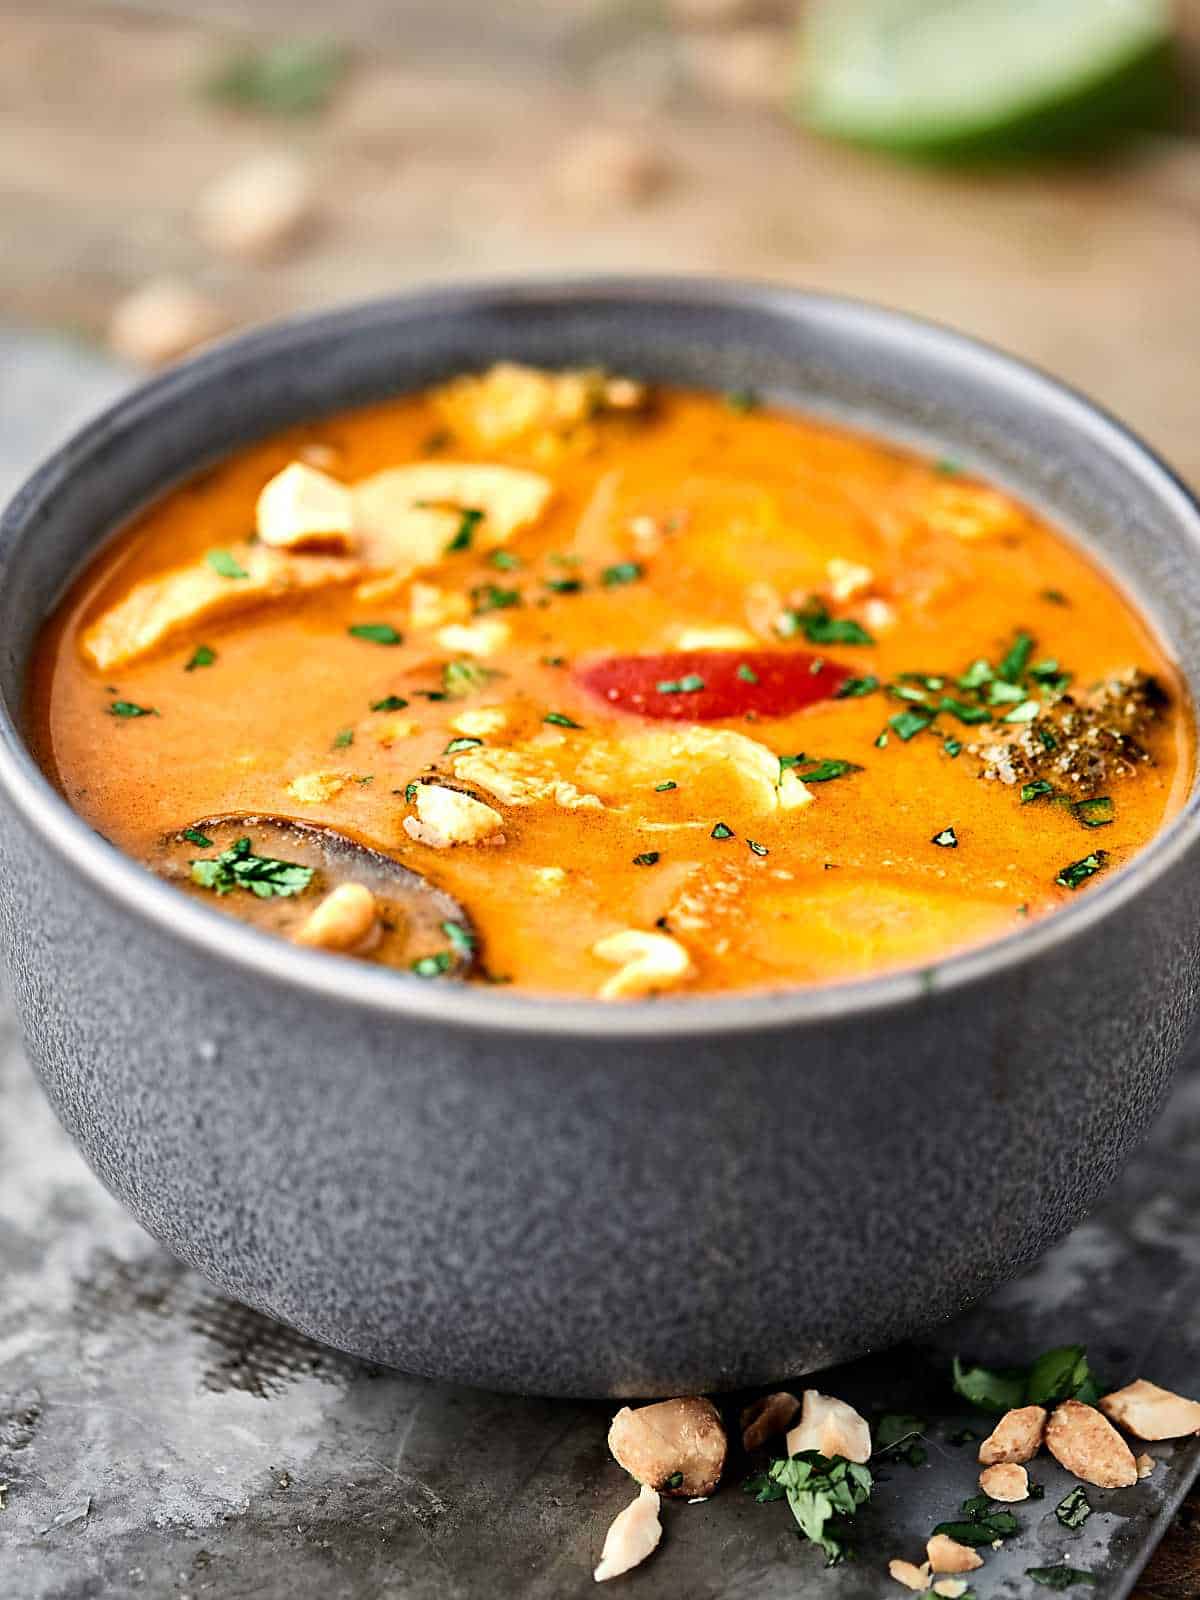 Slow Cooker Thai Chicken Soup Recipe - Quick, Easy, Healthy Dinner